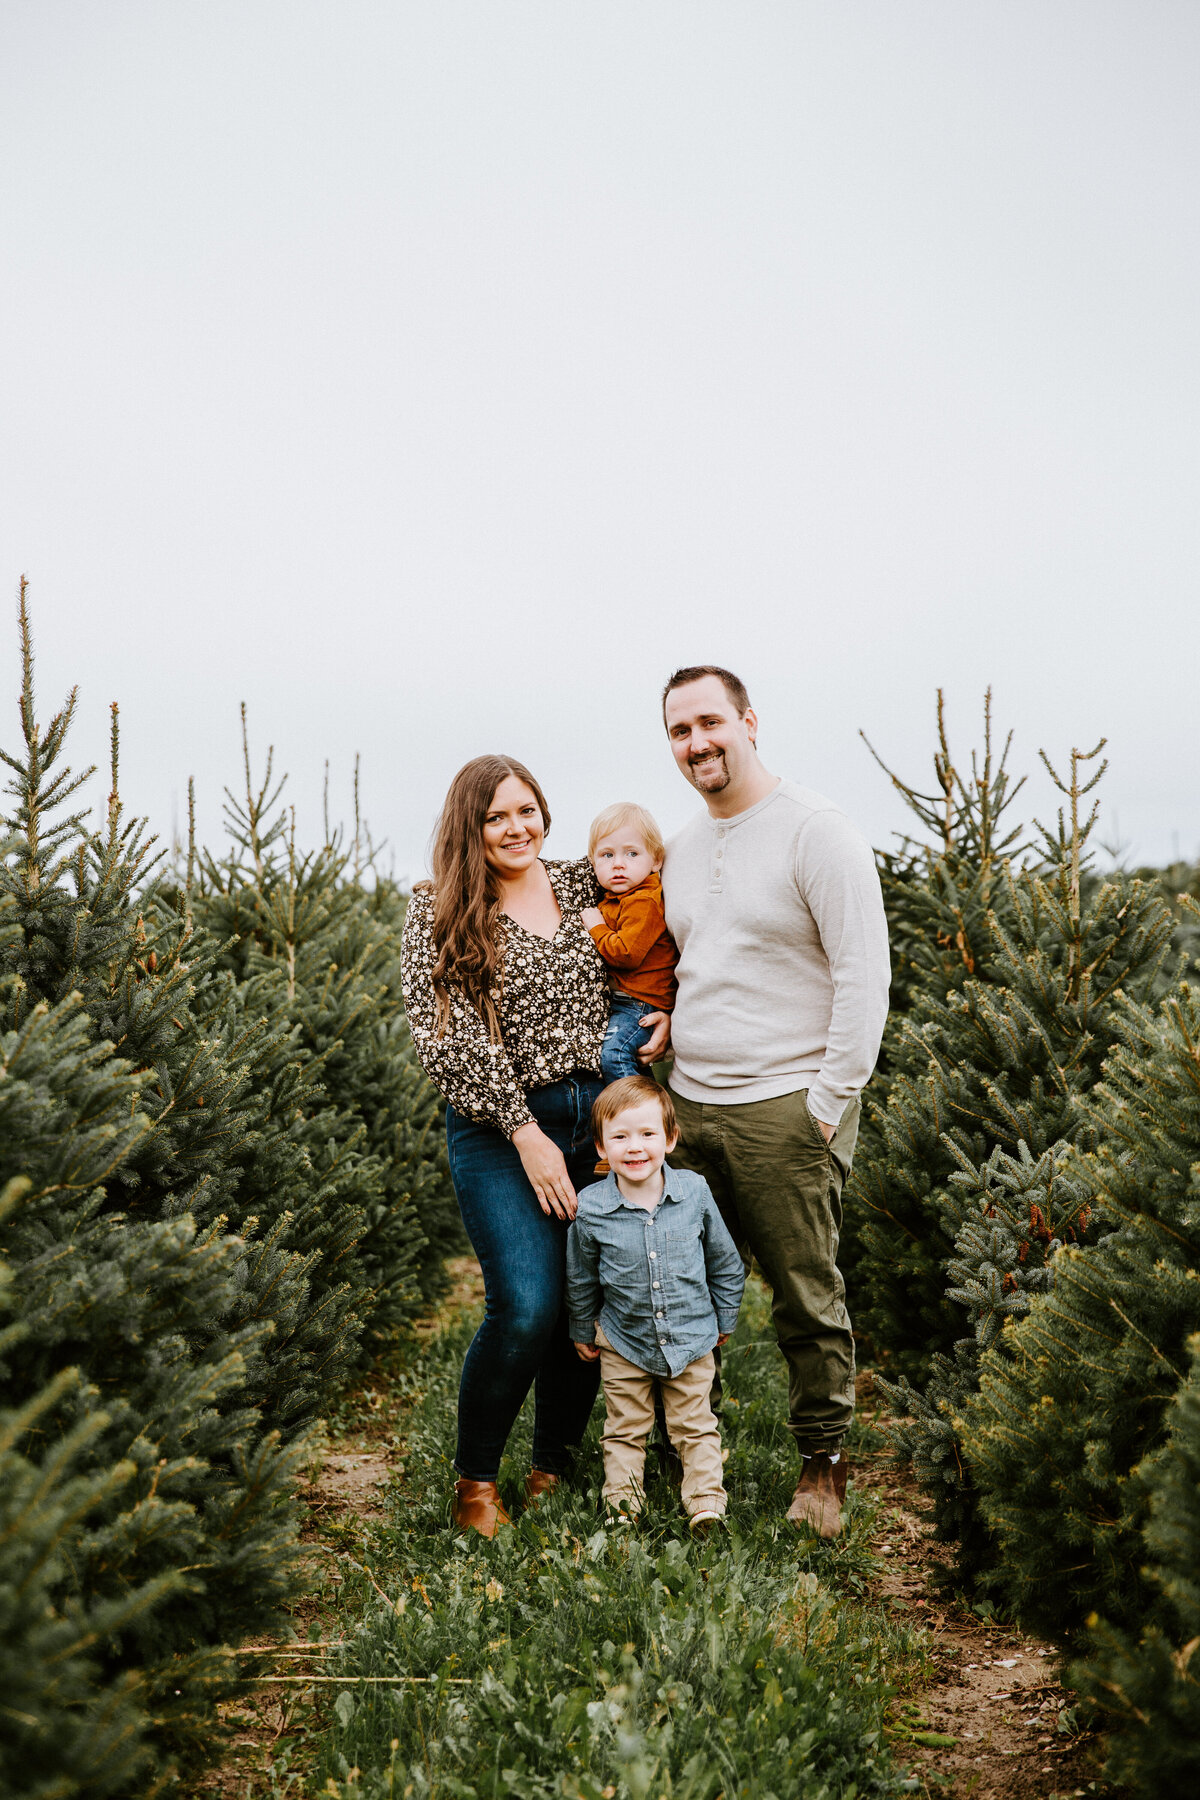 Best family Christmas tree farm photos at Tree Lane Farms in London, Ontario. Mom, Dad, toddler, and infant are standing between the rows of Christmas trees. Mom is holding the baby between her and dad and the toddler is standing between them. Everyone is smiling at the camera.